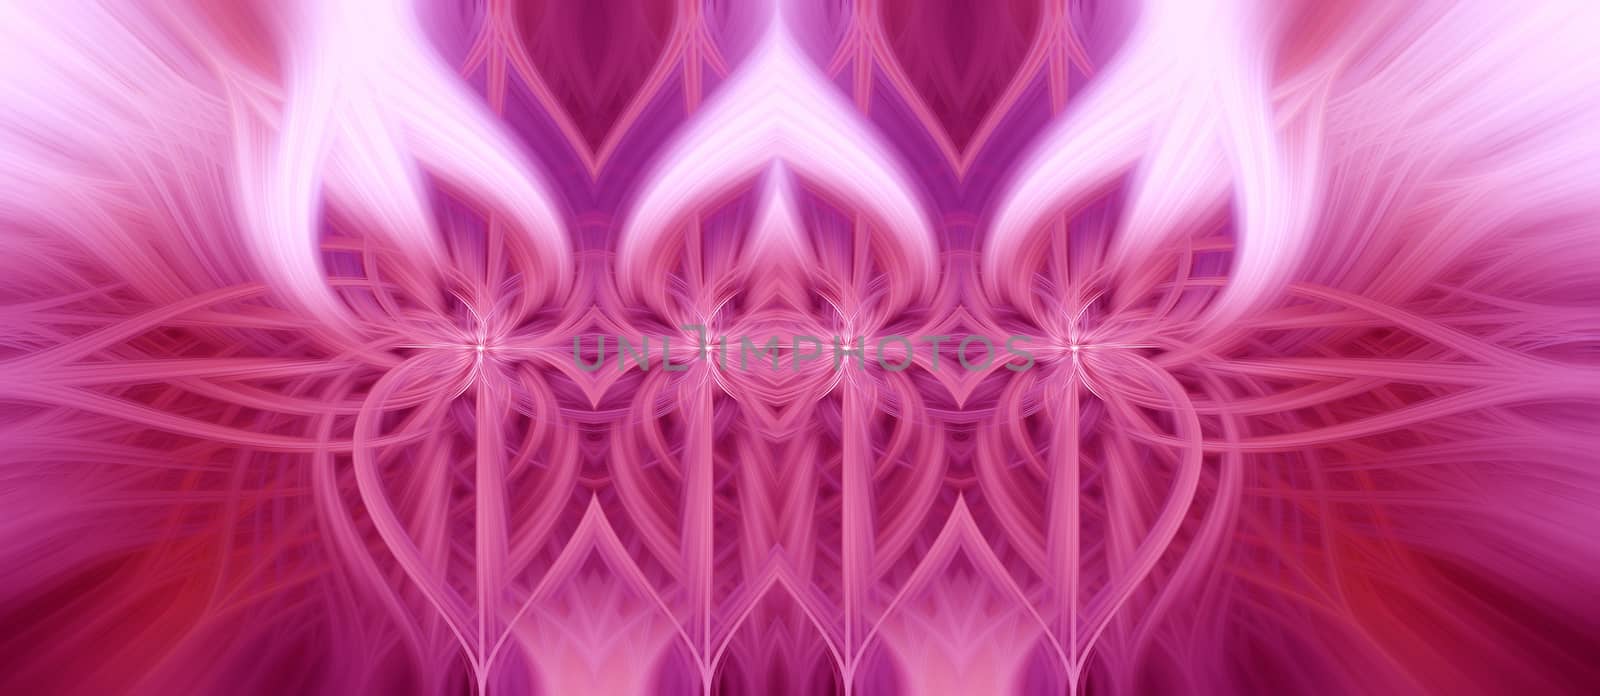 Beautiful abstract intertwined 3d fibers forming an ornament out of various symmetrical shapes. White flame in the middle. Purple and pink colors. Illustration. Panorama and banner size.